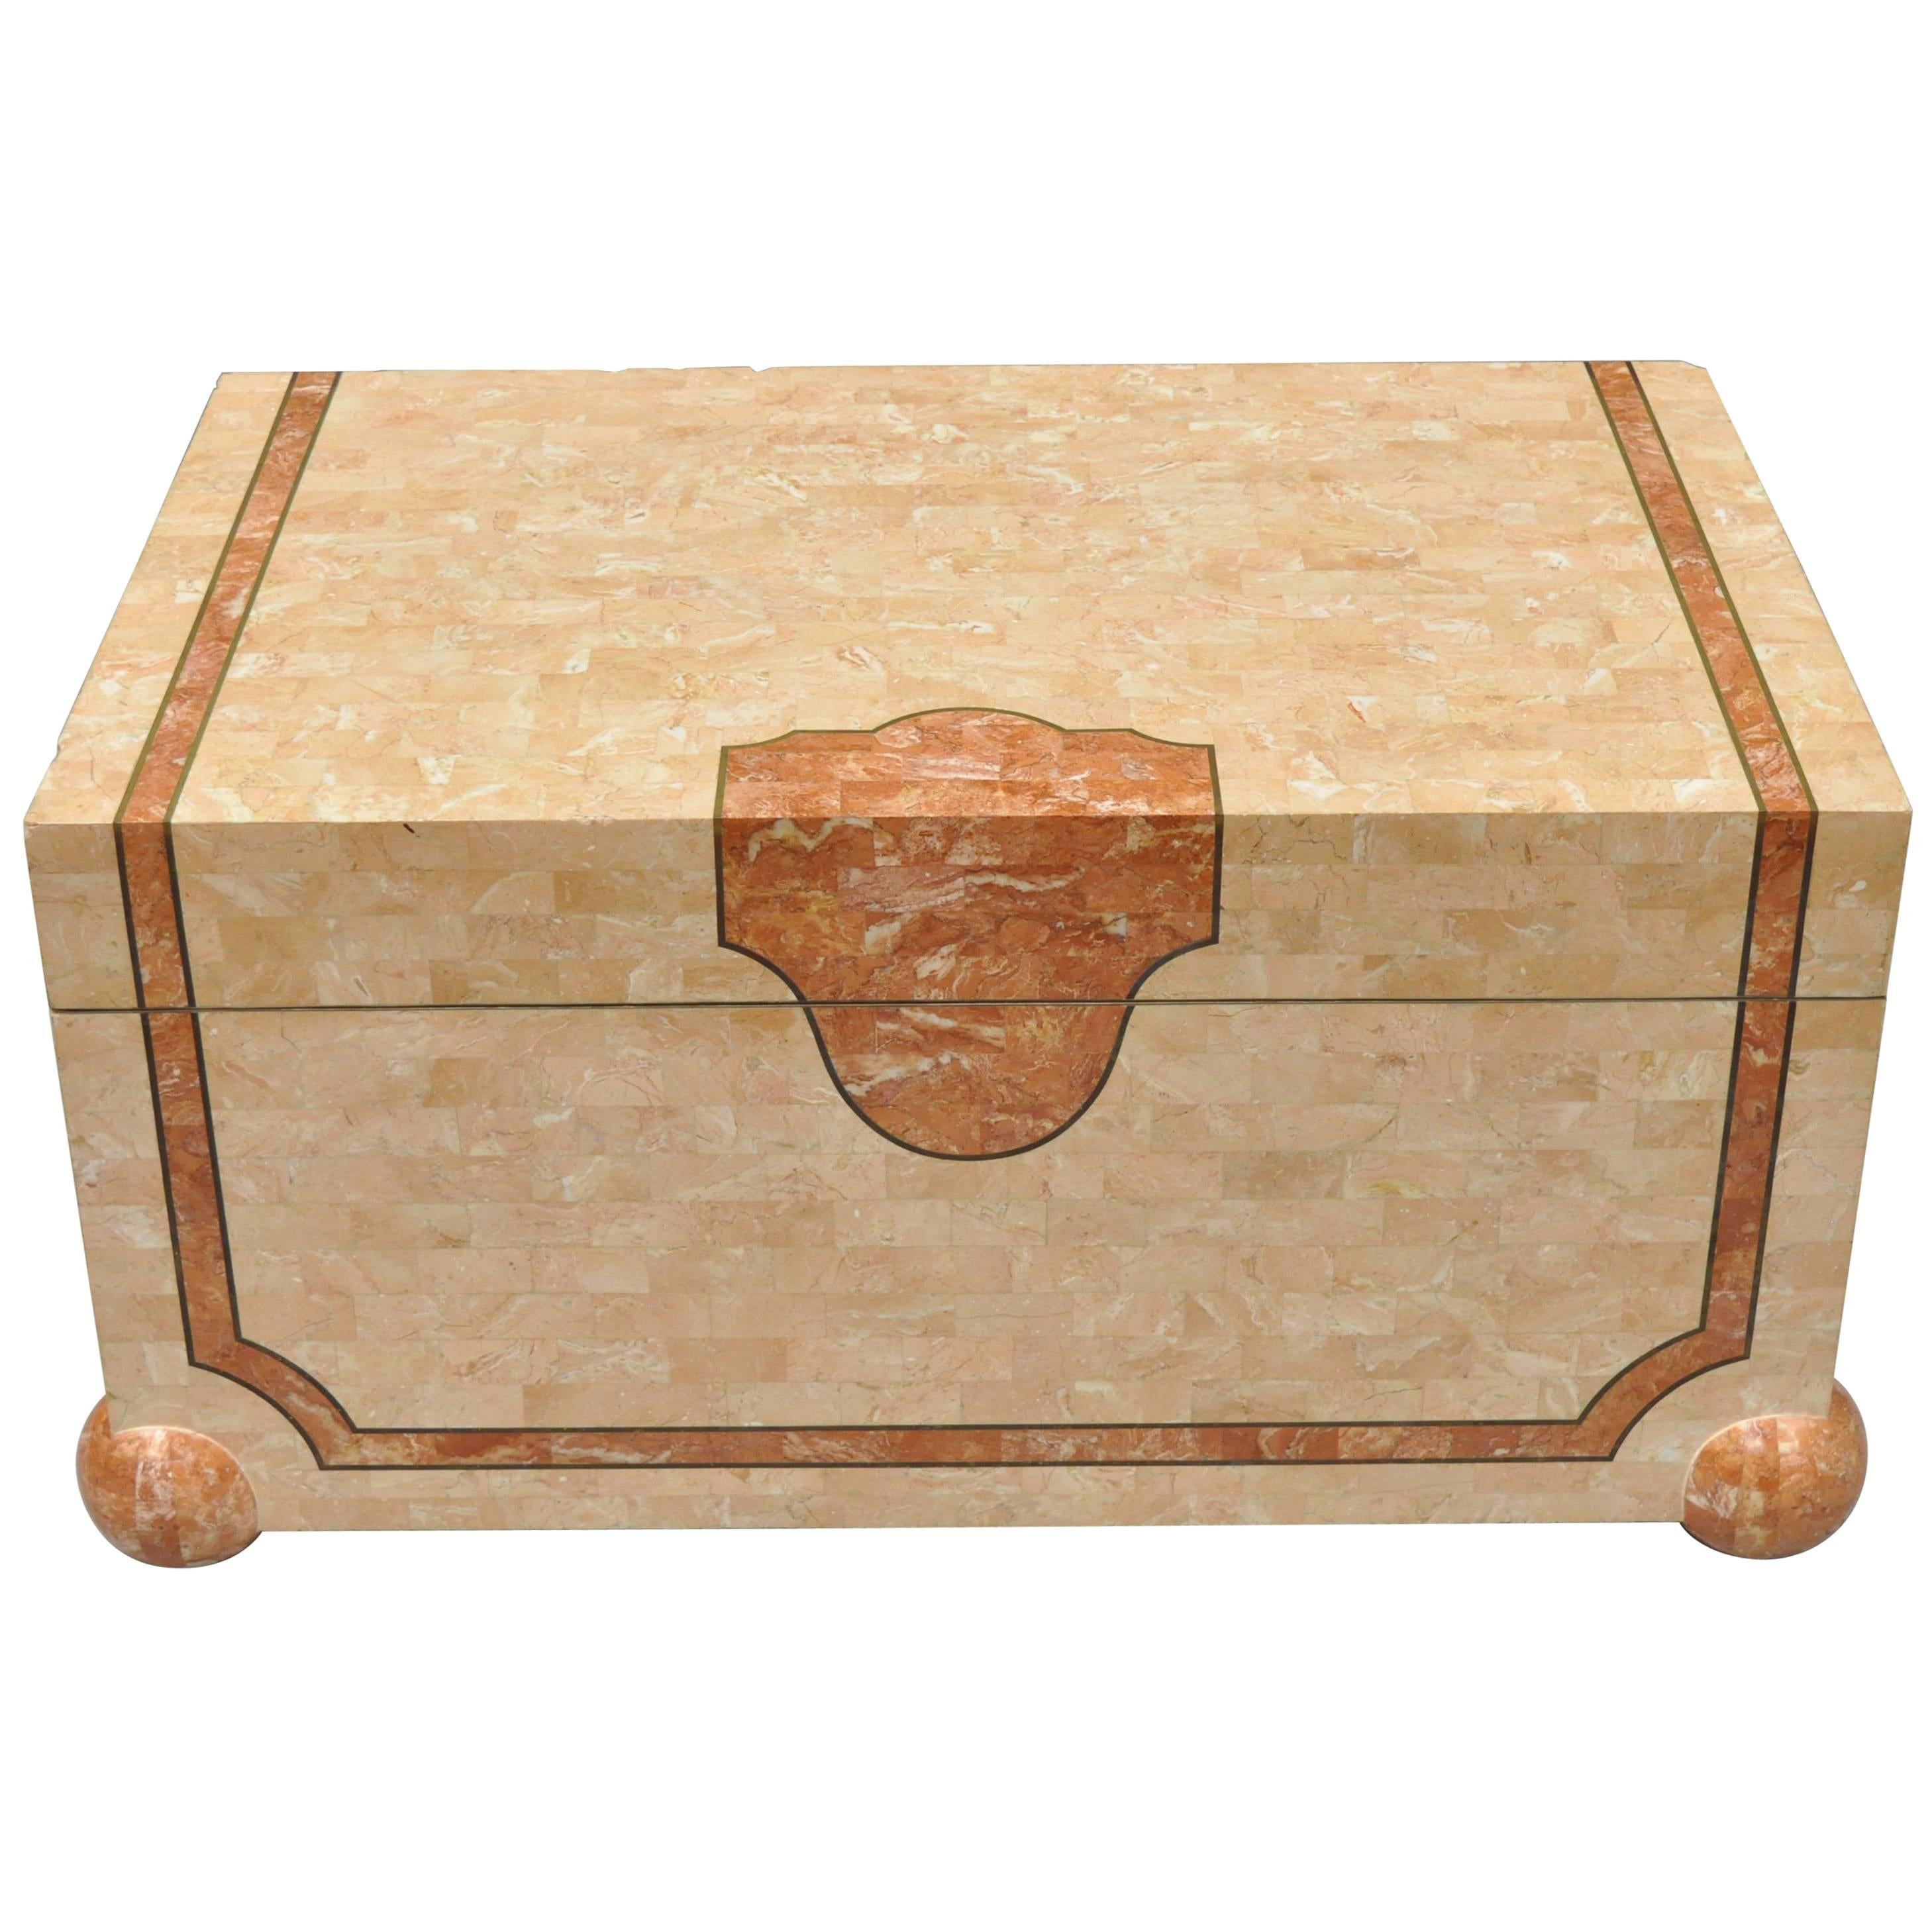 Robert Marcius Casa Bique Tessellated Stone Trunk Box Coffee Table Chest